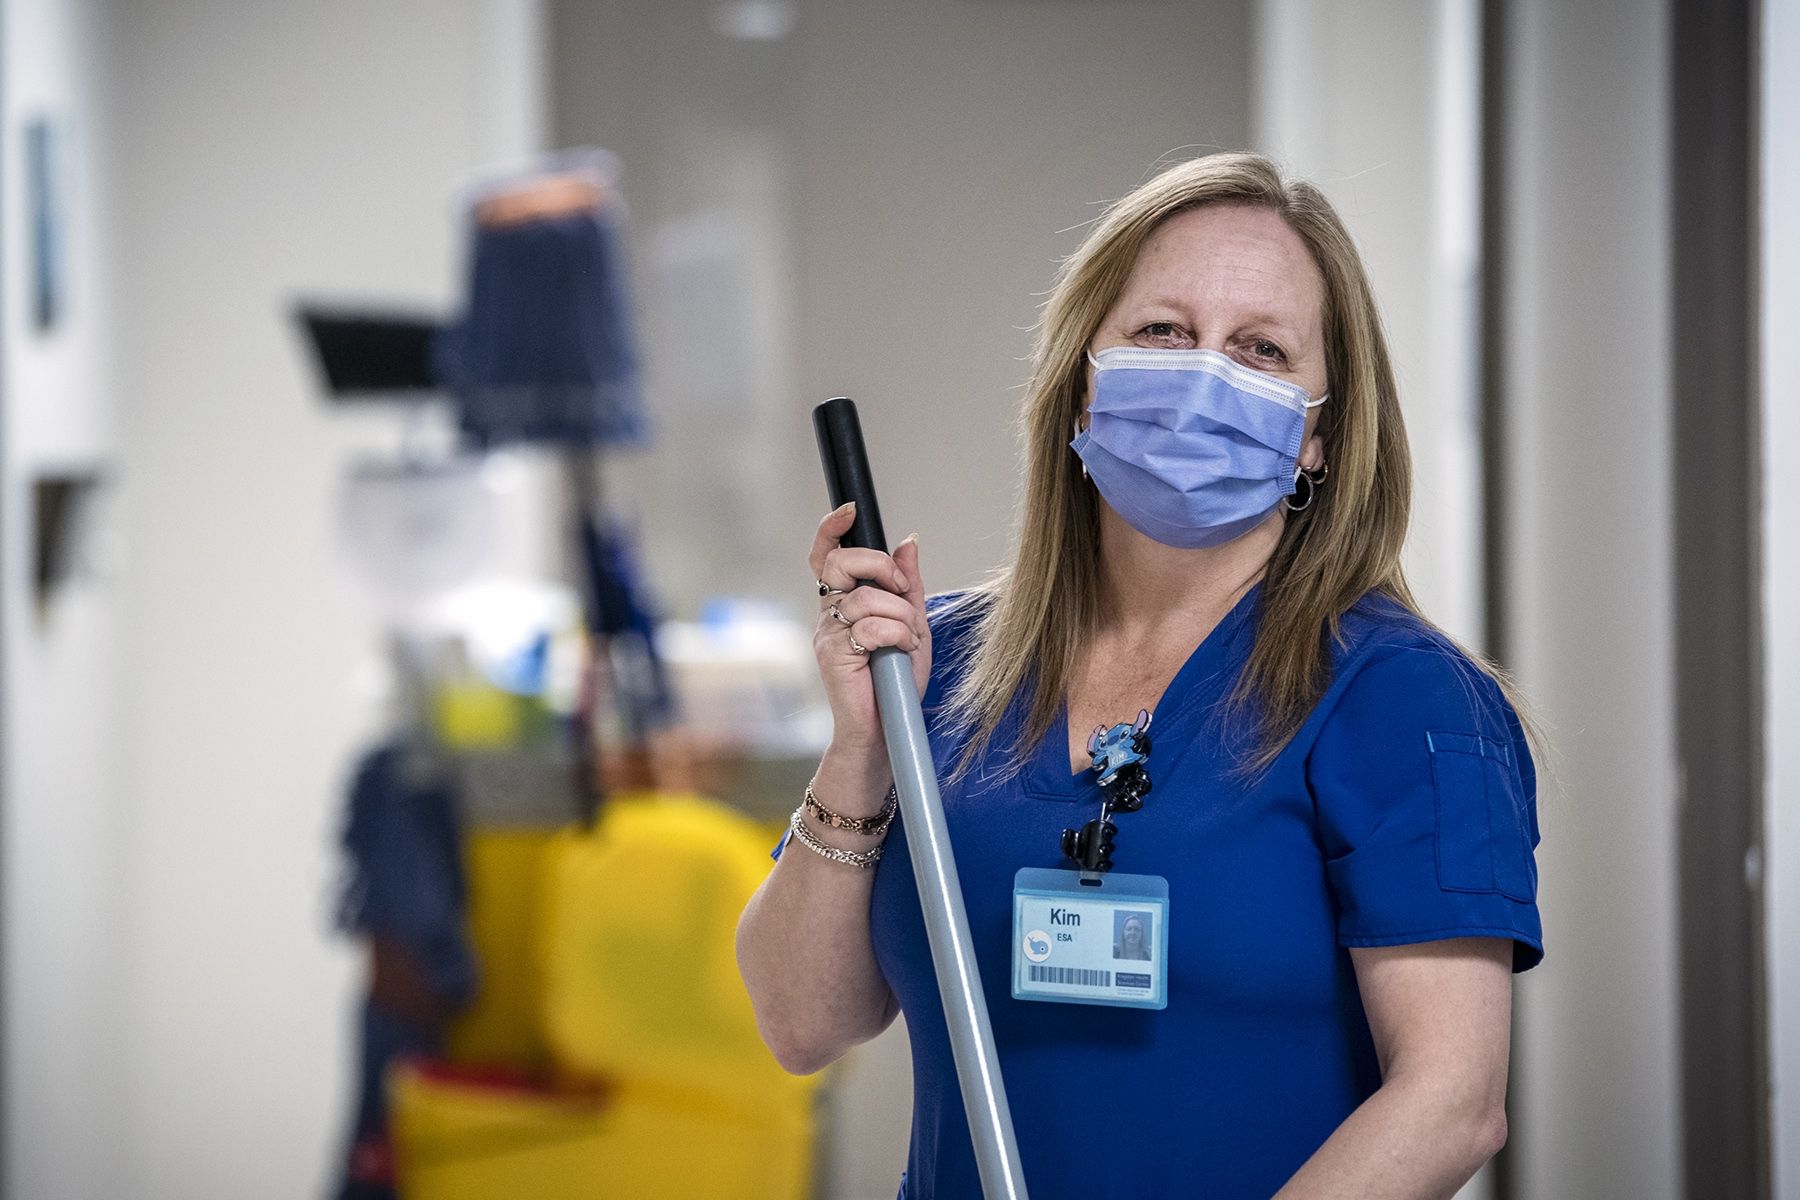 Kimberley Dickinson is pictured holding a broom in a hallway at the HDH site. She has blonde, shoulder length hair and is wearing blue scrubs and mask.